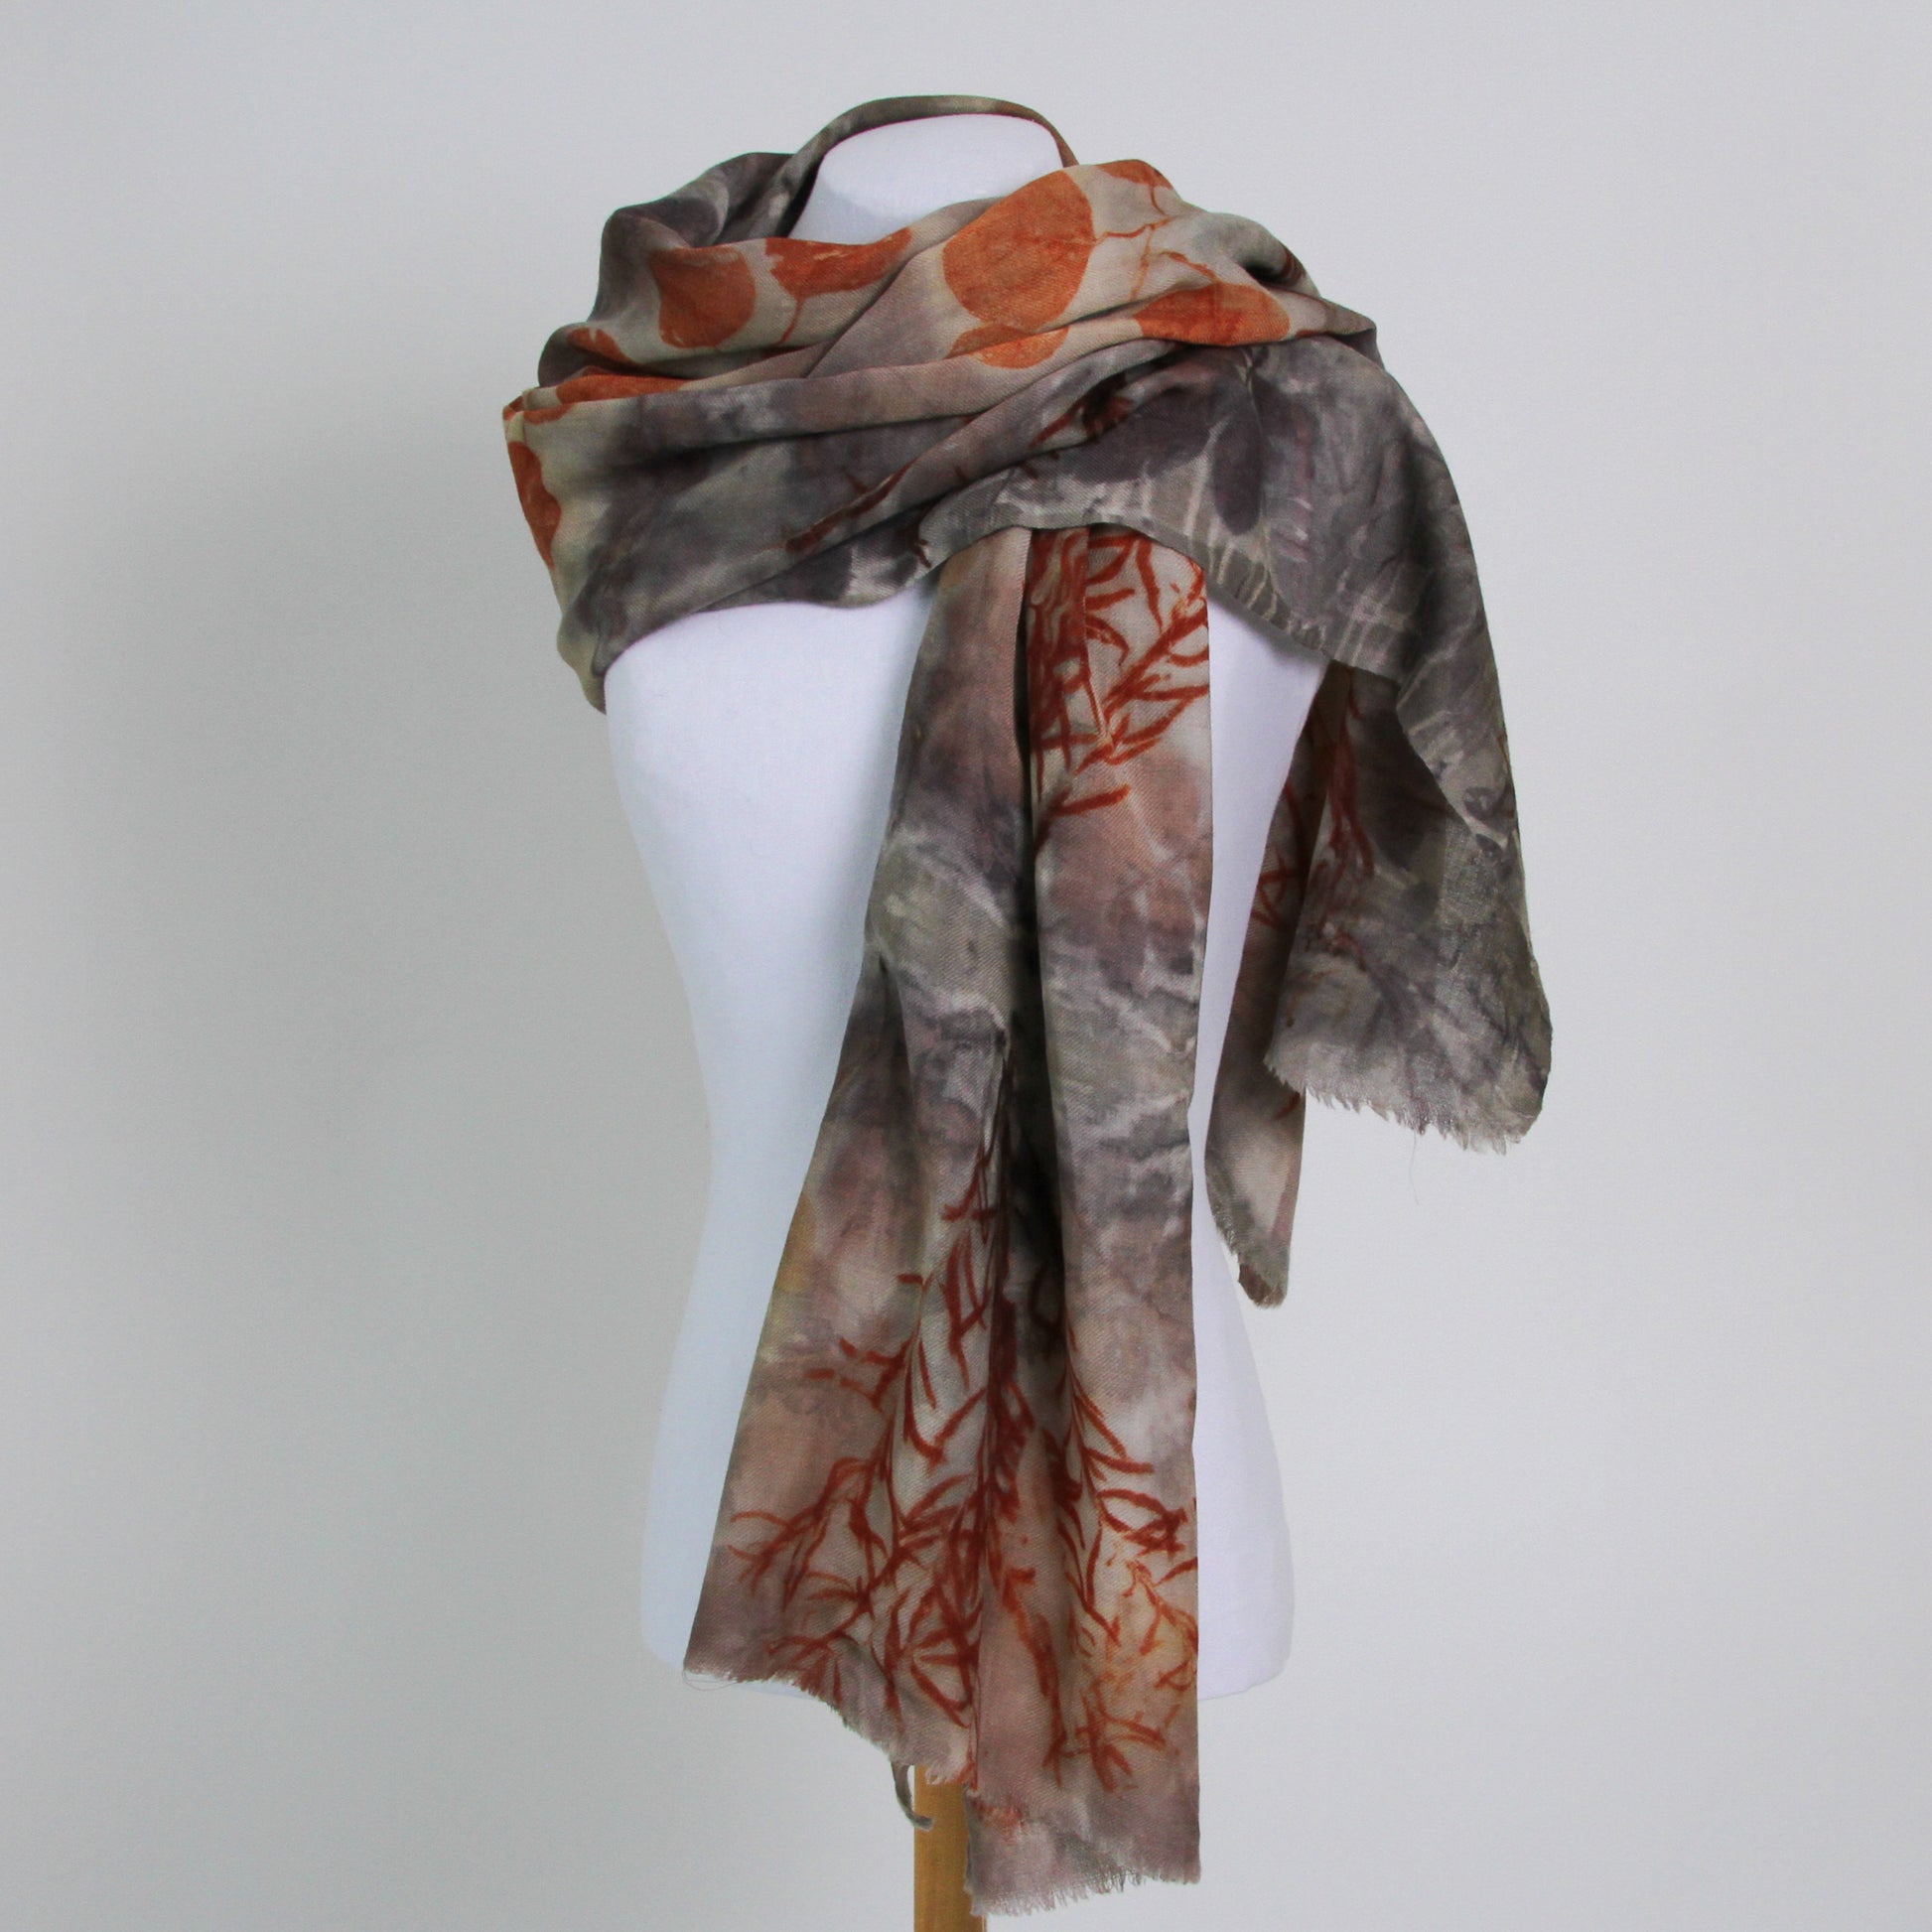 Brown wool scarf with orange printed leaves and foliage